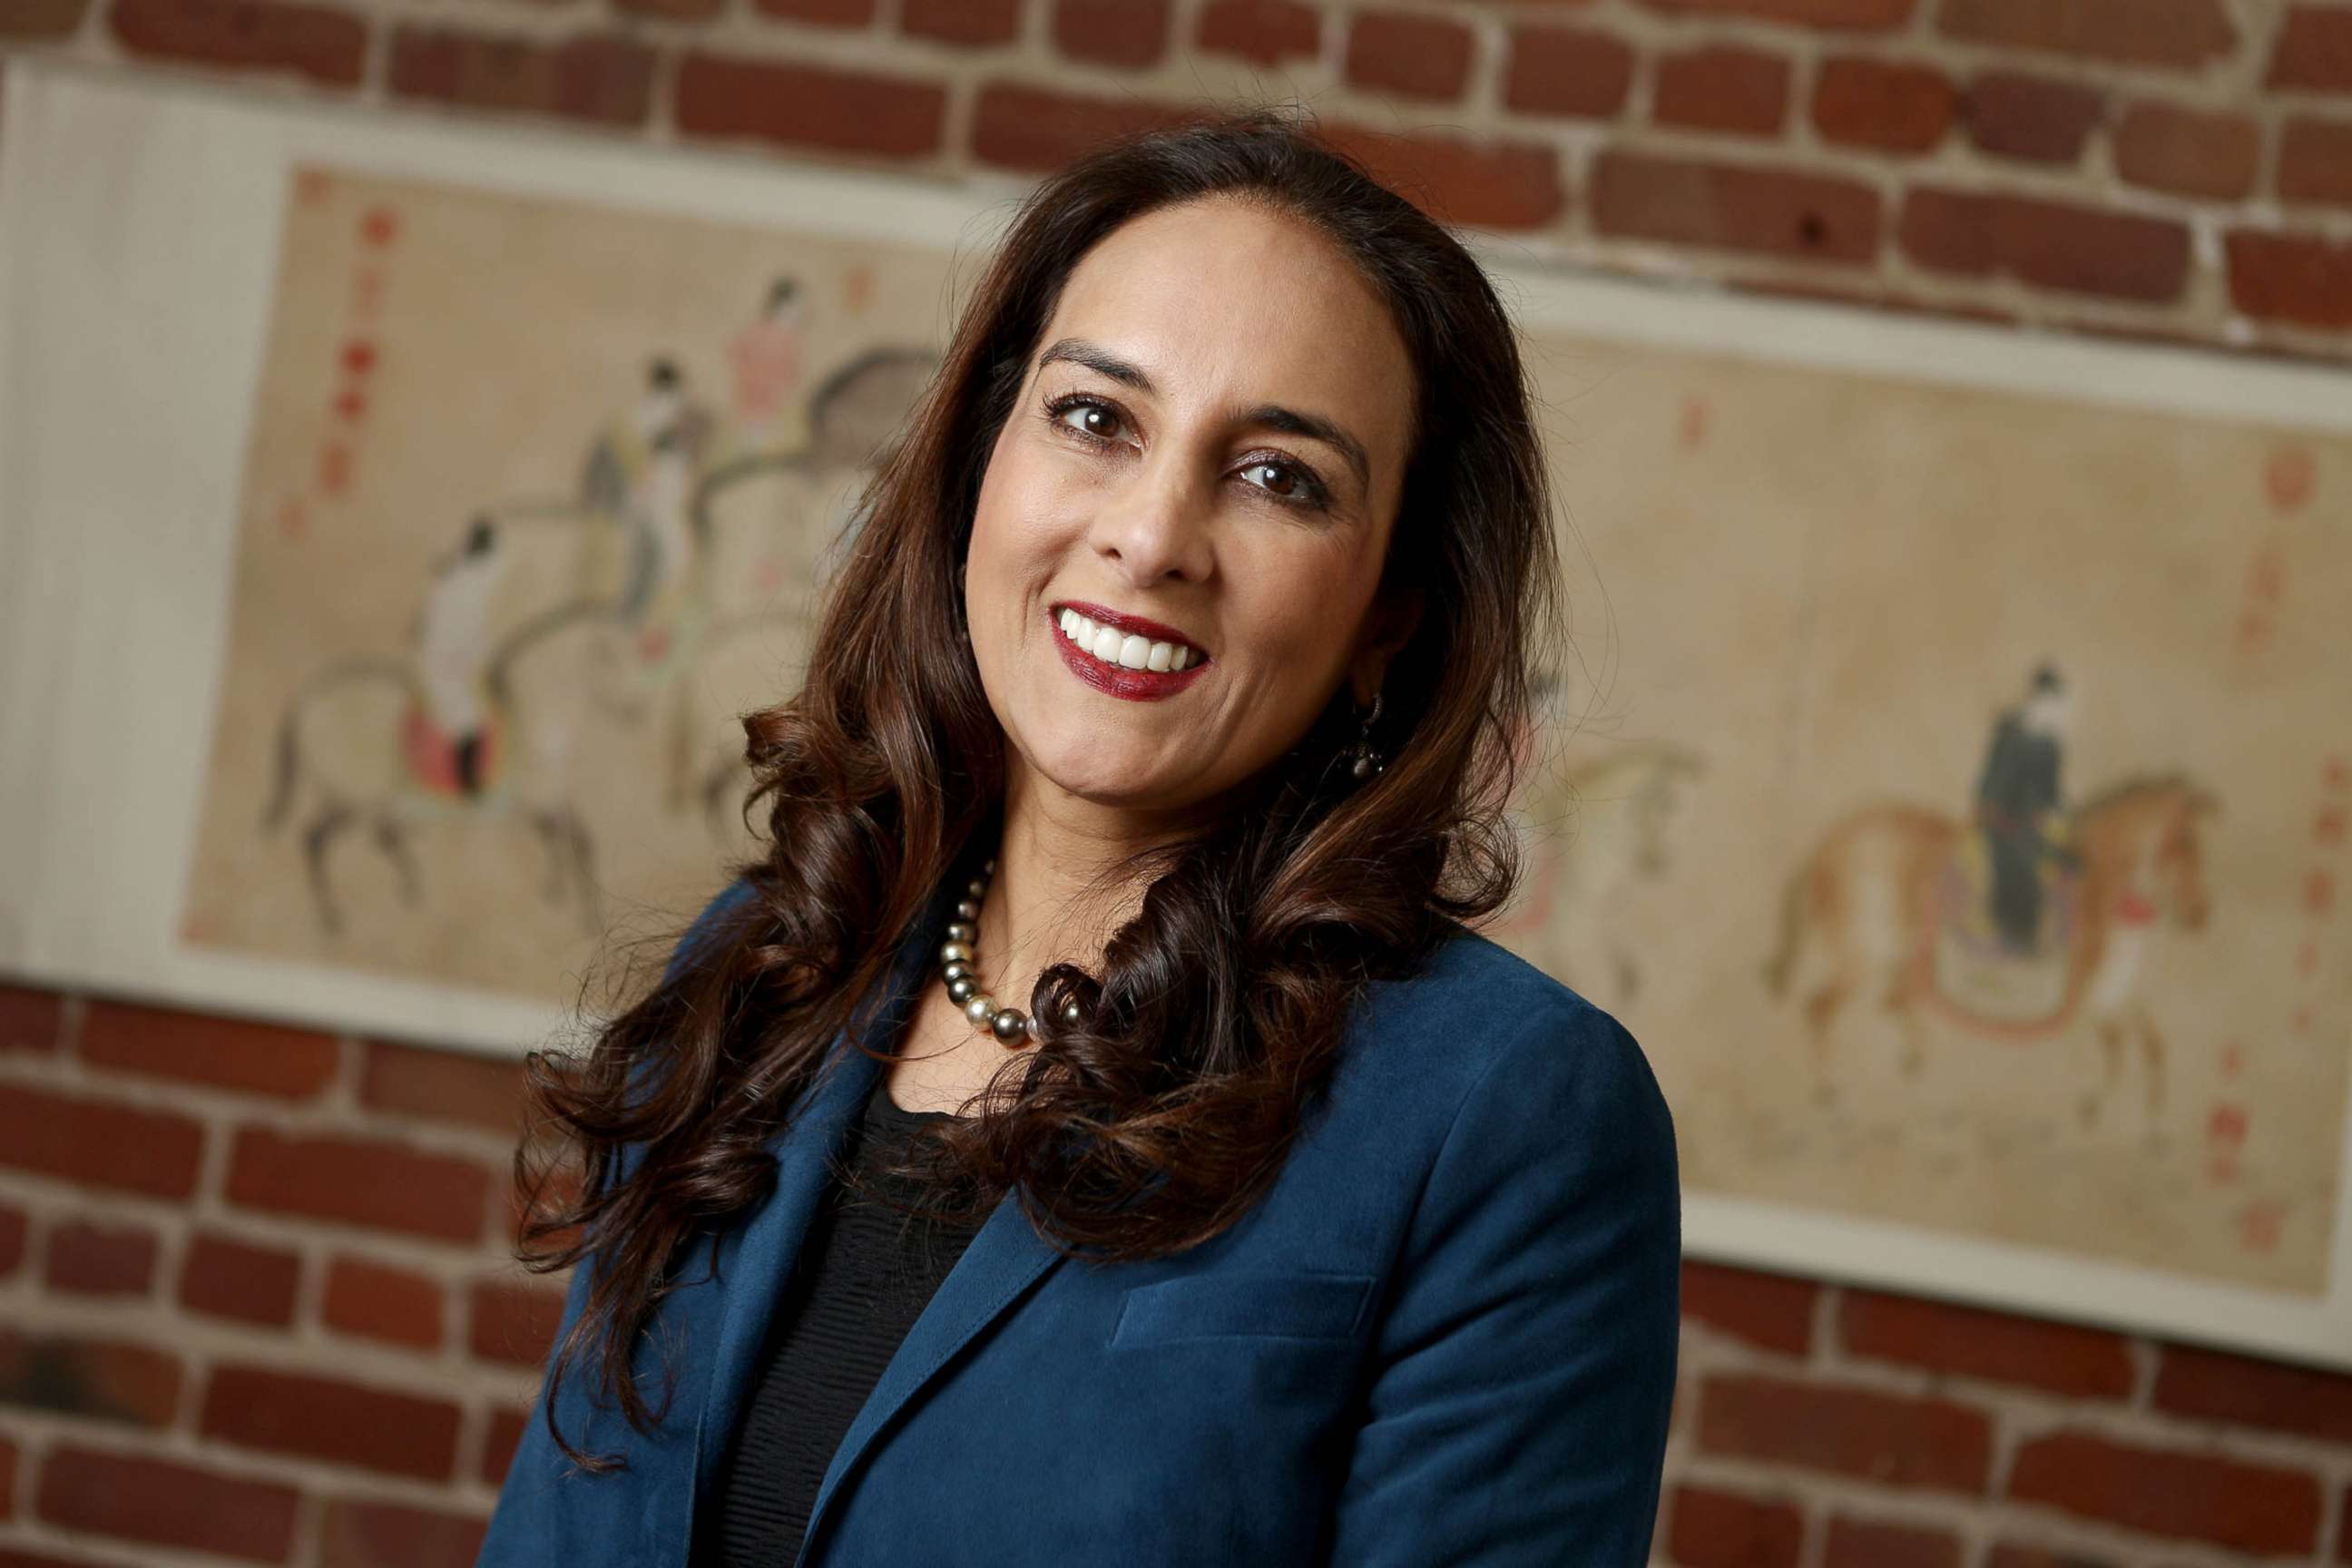 PHOTO: FILE - Attorney Harmeet Dhillon California's national committeewoman for the Republican National Committee poses for a photograph at her office in San Francisco, Calif., Sept. 20, 2017.